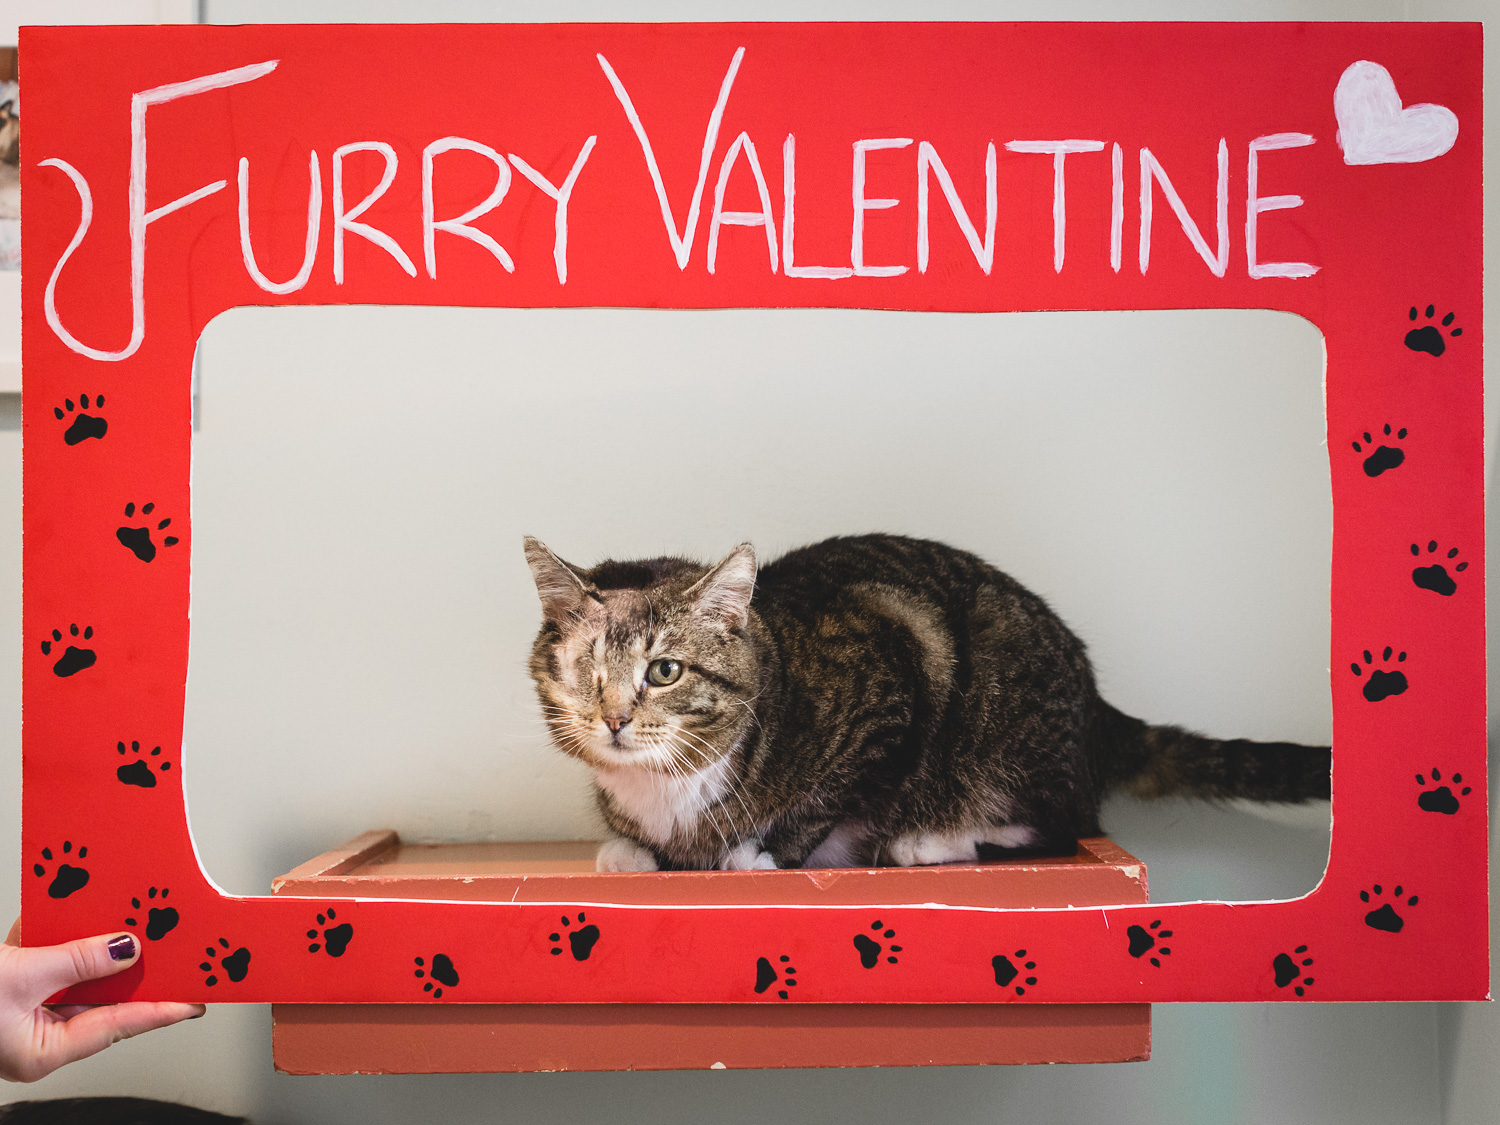 Furry Valentine Booth In Chicago